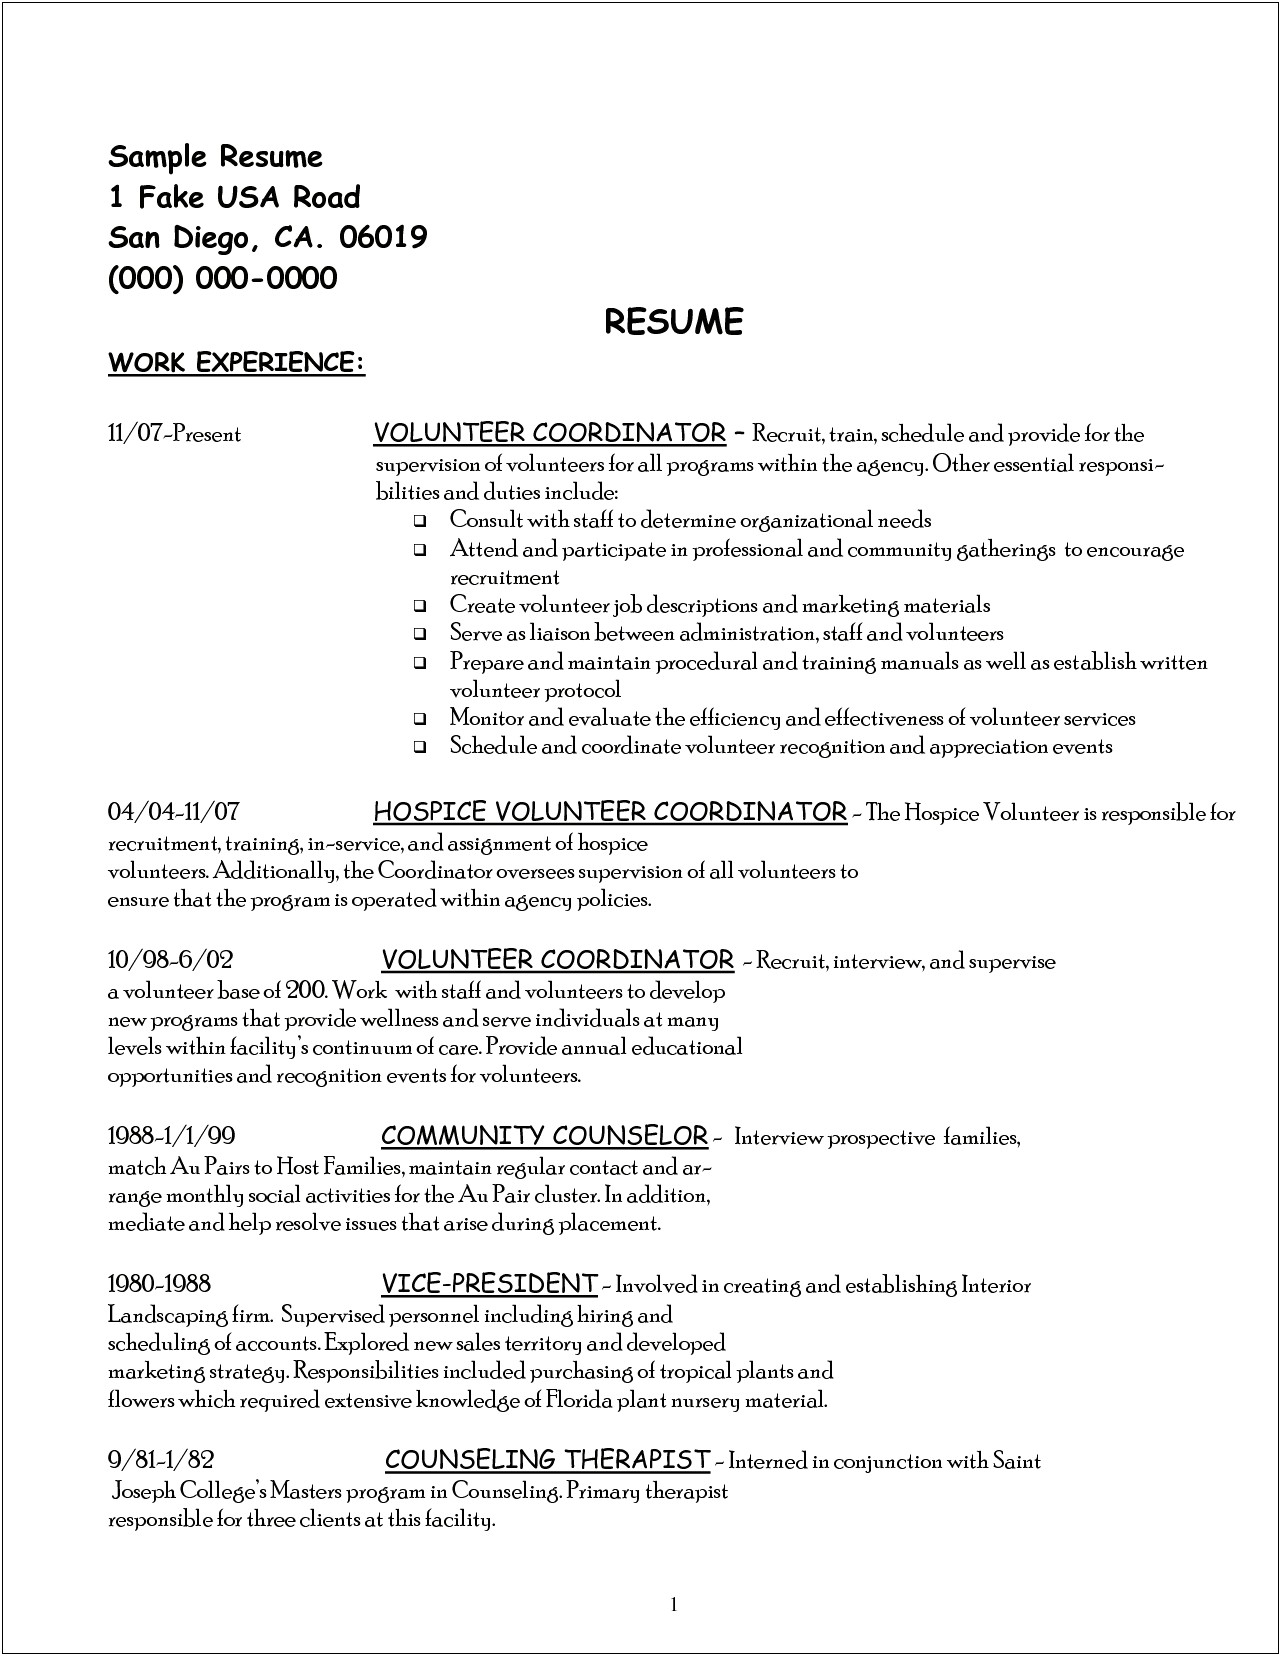 Resume Example For Volunteer Work And Work